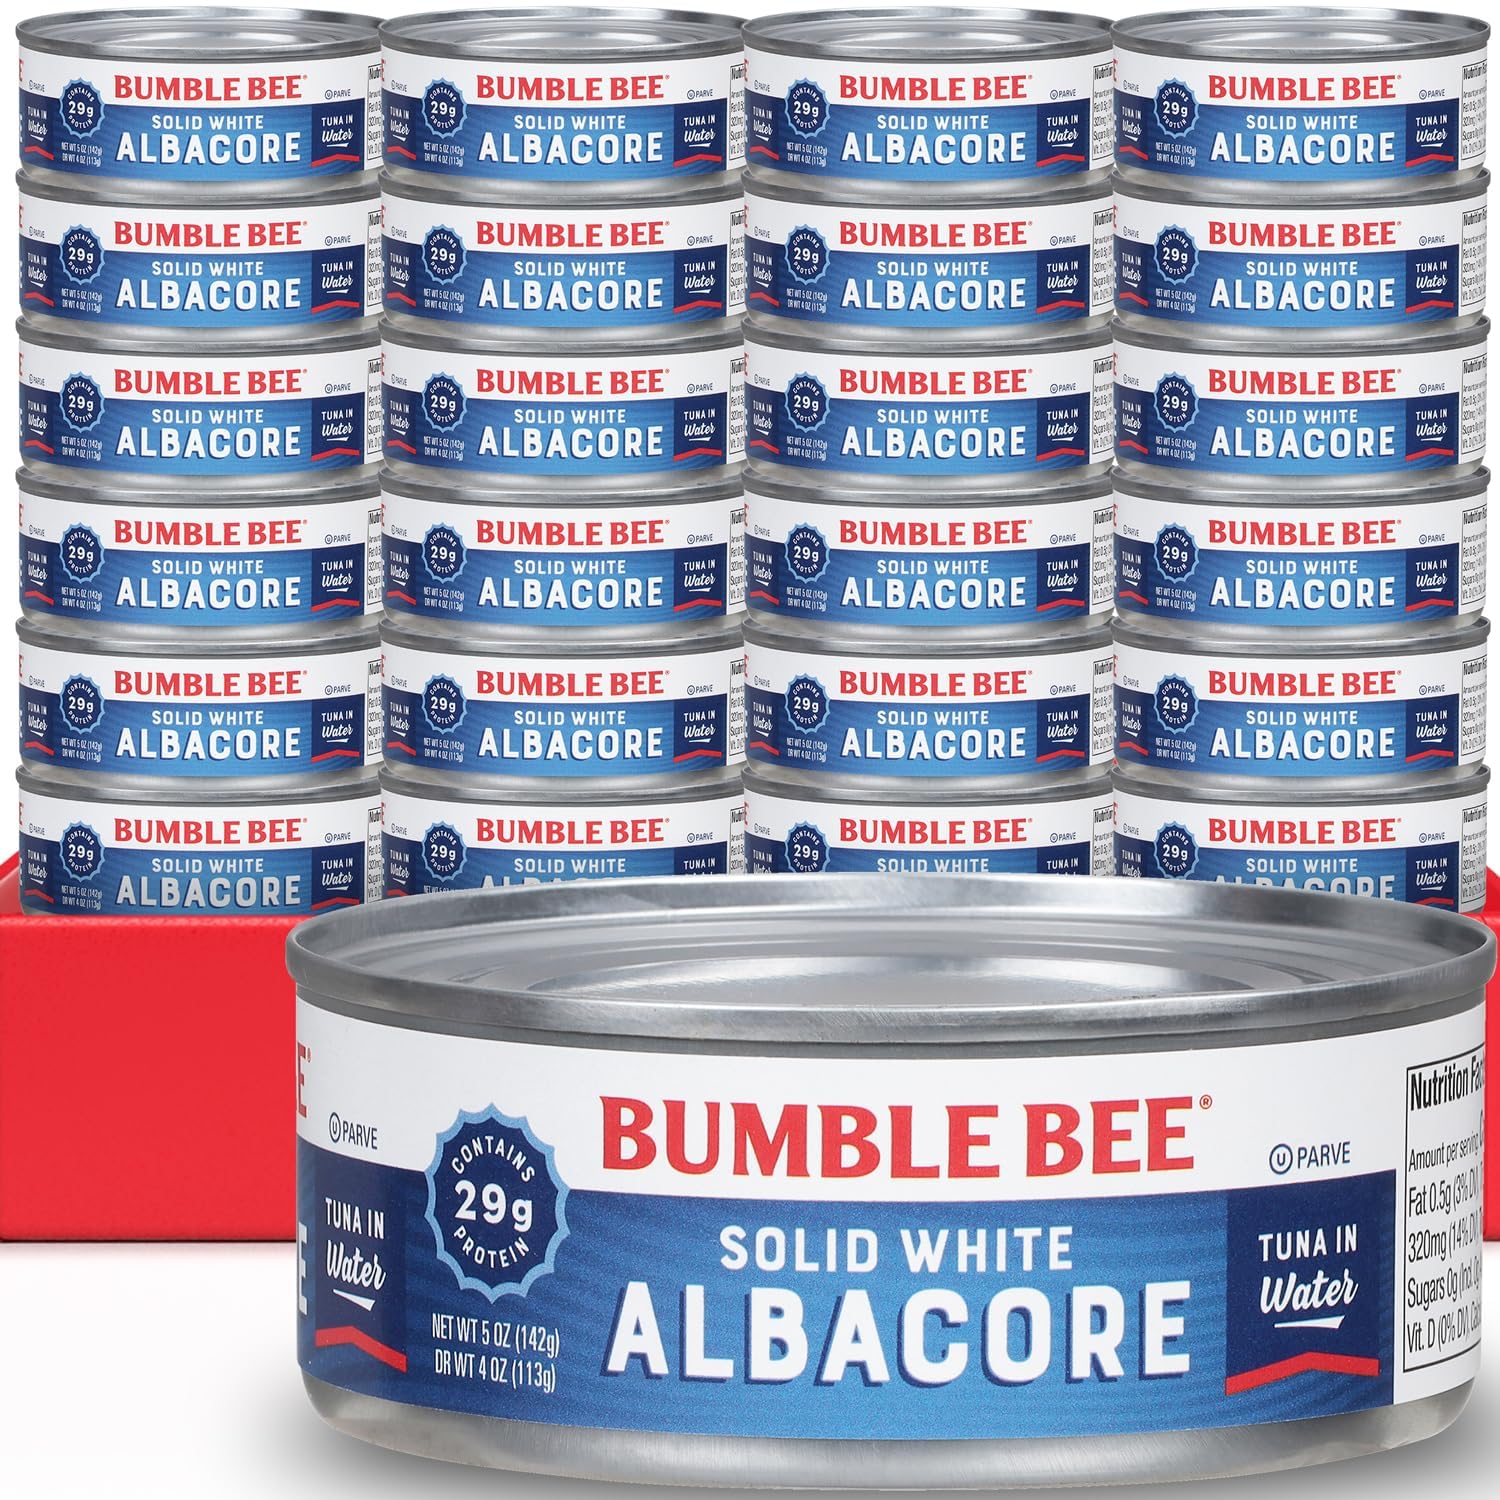 Bumble Bee Solid White Albacore Tuna in Water, 5 oz Can (Pack of 24) $24.87 at Amazon